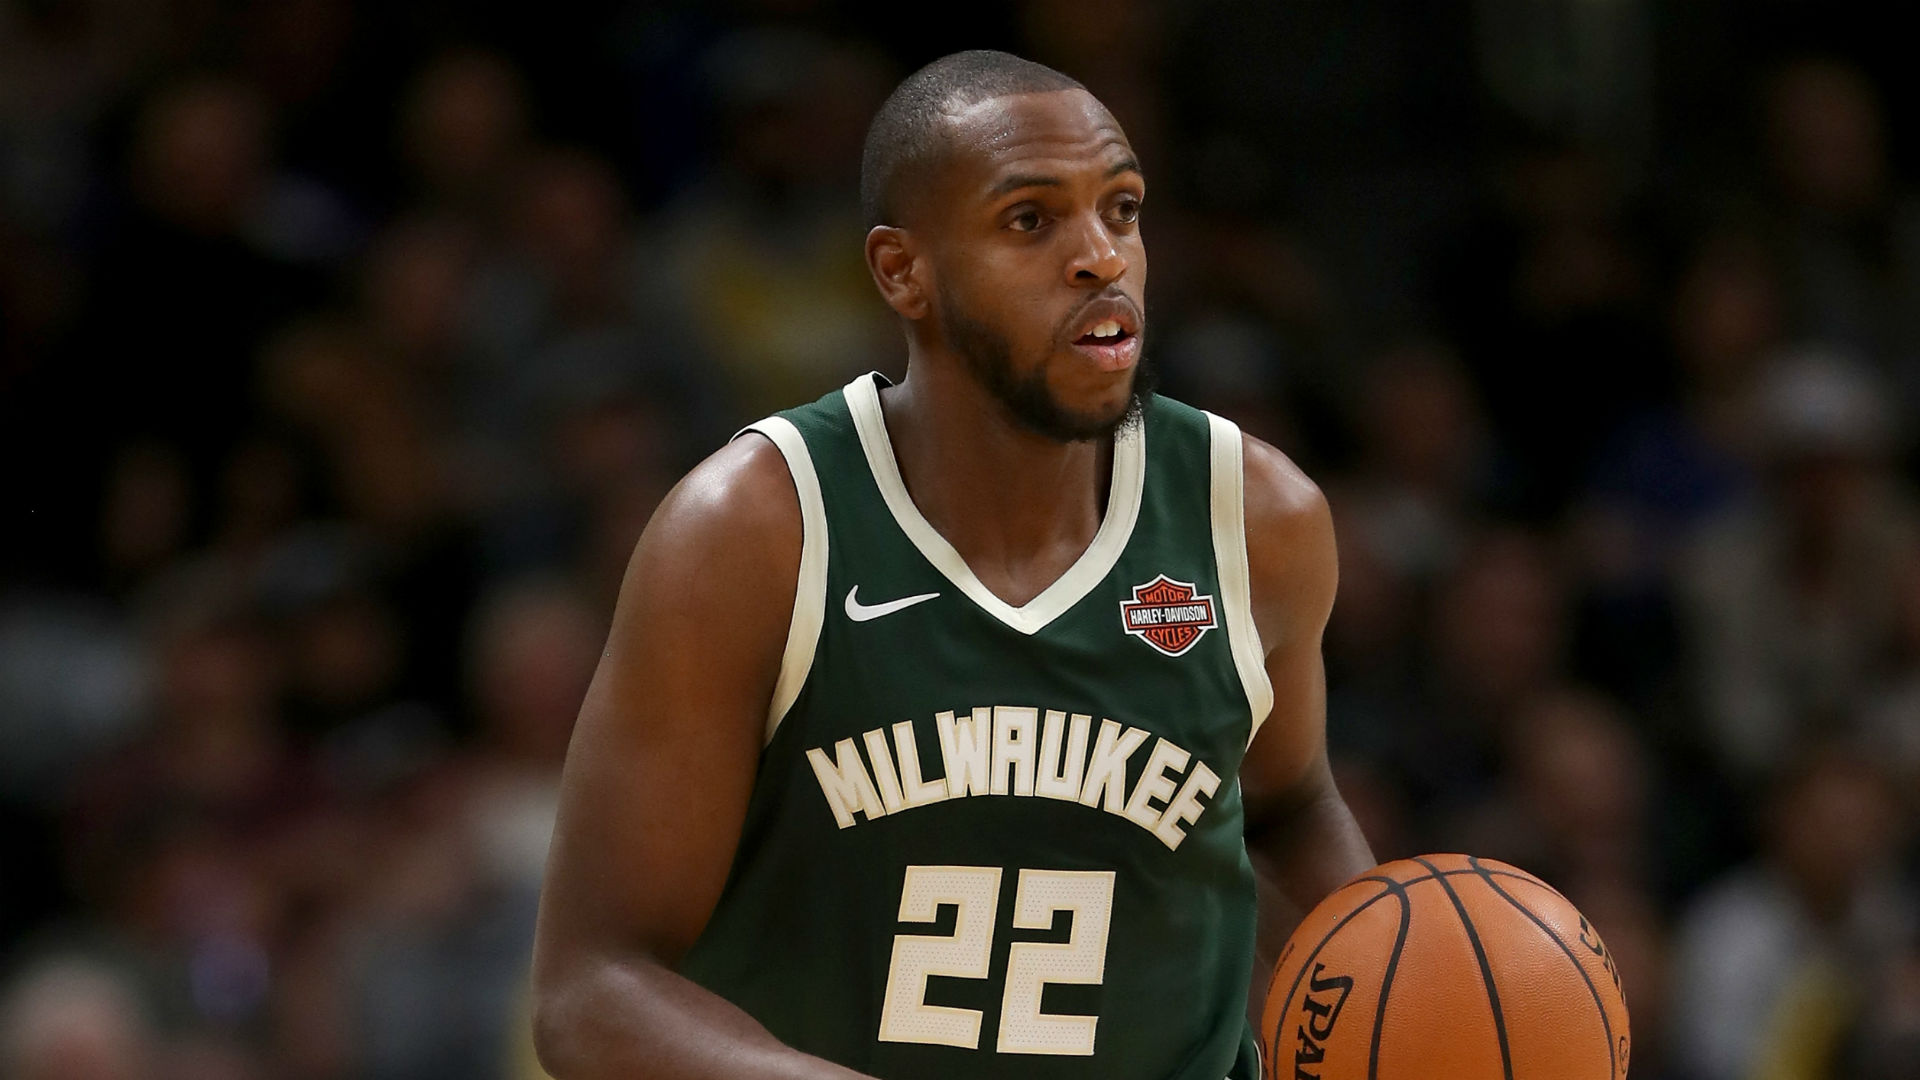 The Milwaukee Bucks are on course to finish top of the Eastern Conference, but Khris Middleton says they have not discussed being top seed.